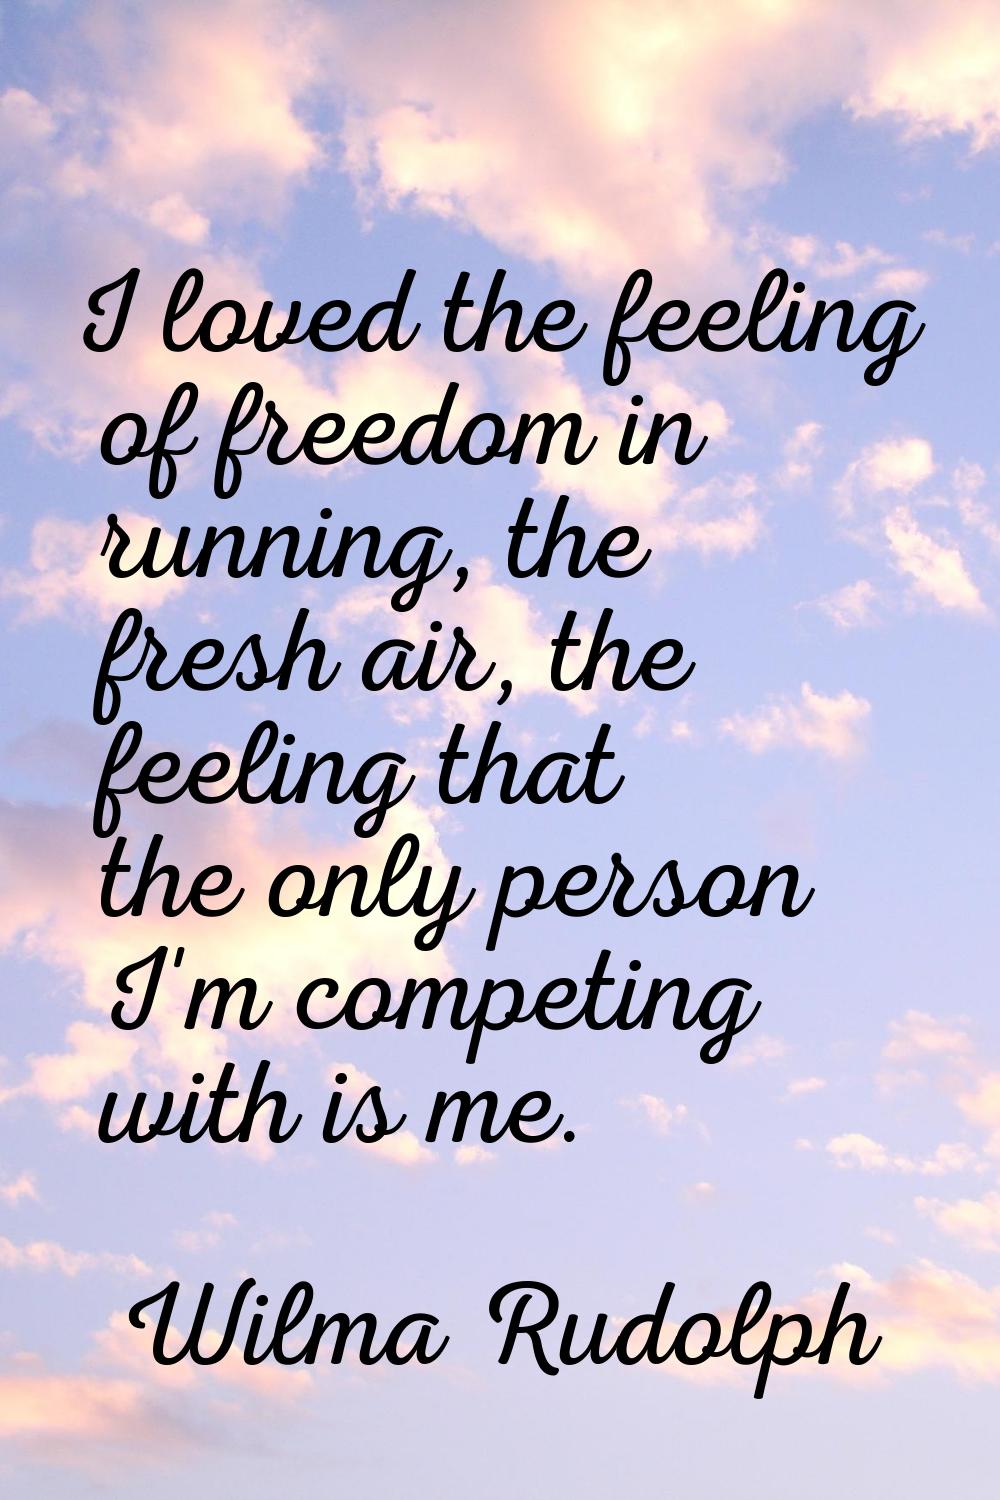 I loved the feeling of freedom in running, the fresh air, the feeling that the only person I'm comp